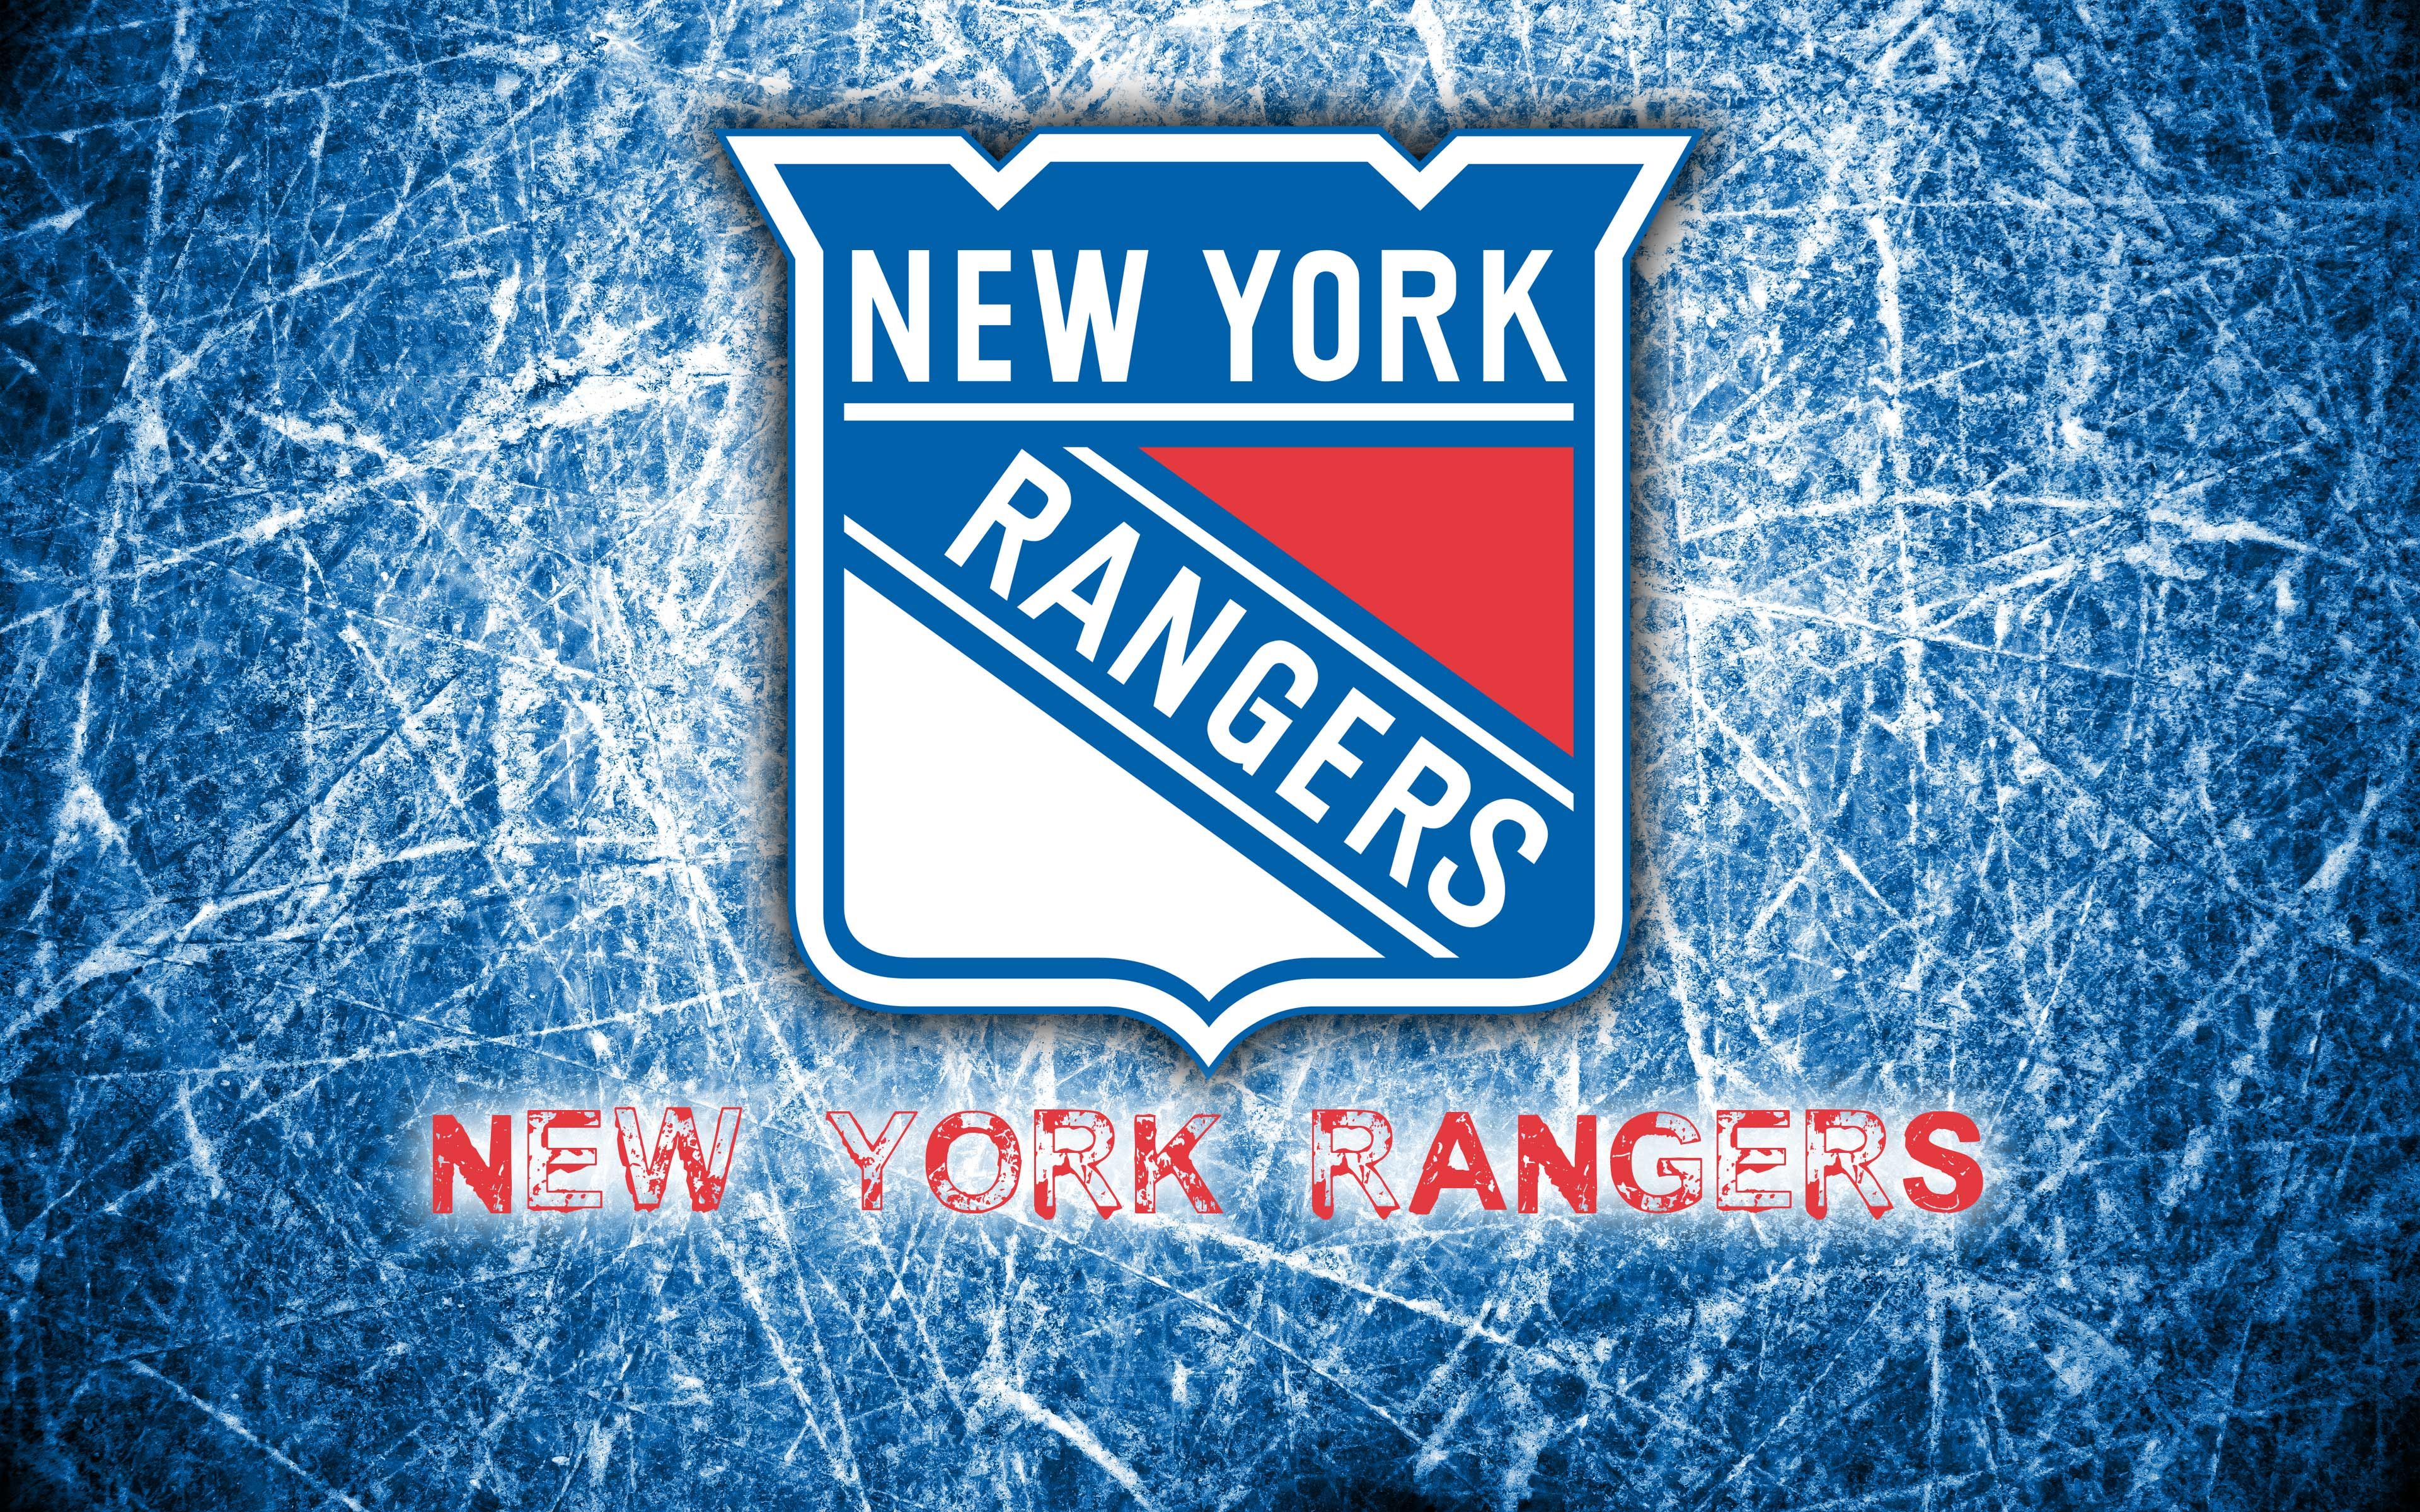 new york rangers wallpaper,font,logo,electric blue,competition event,brand